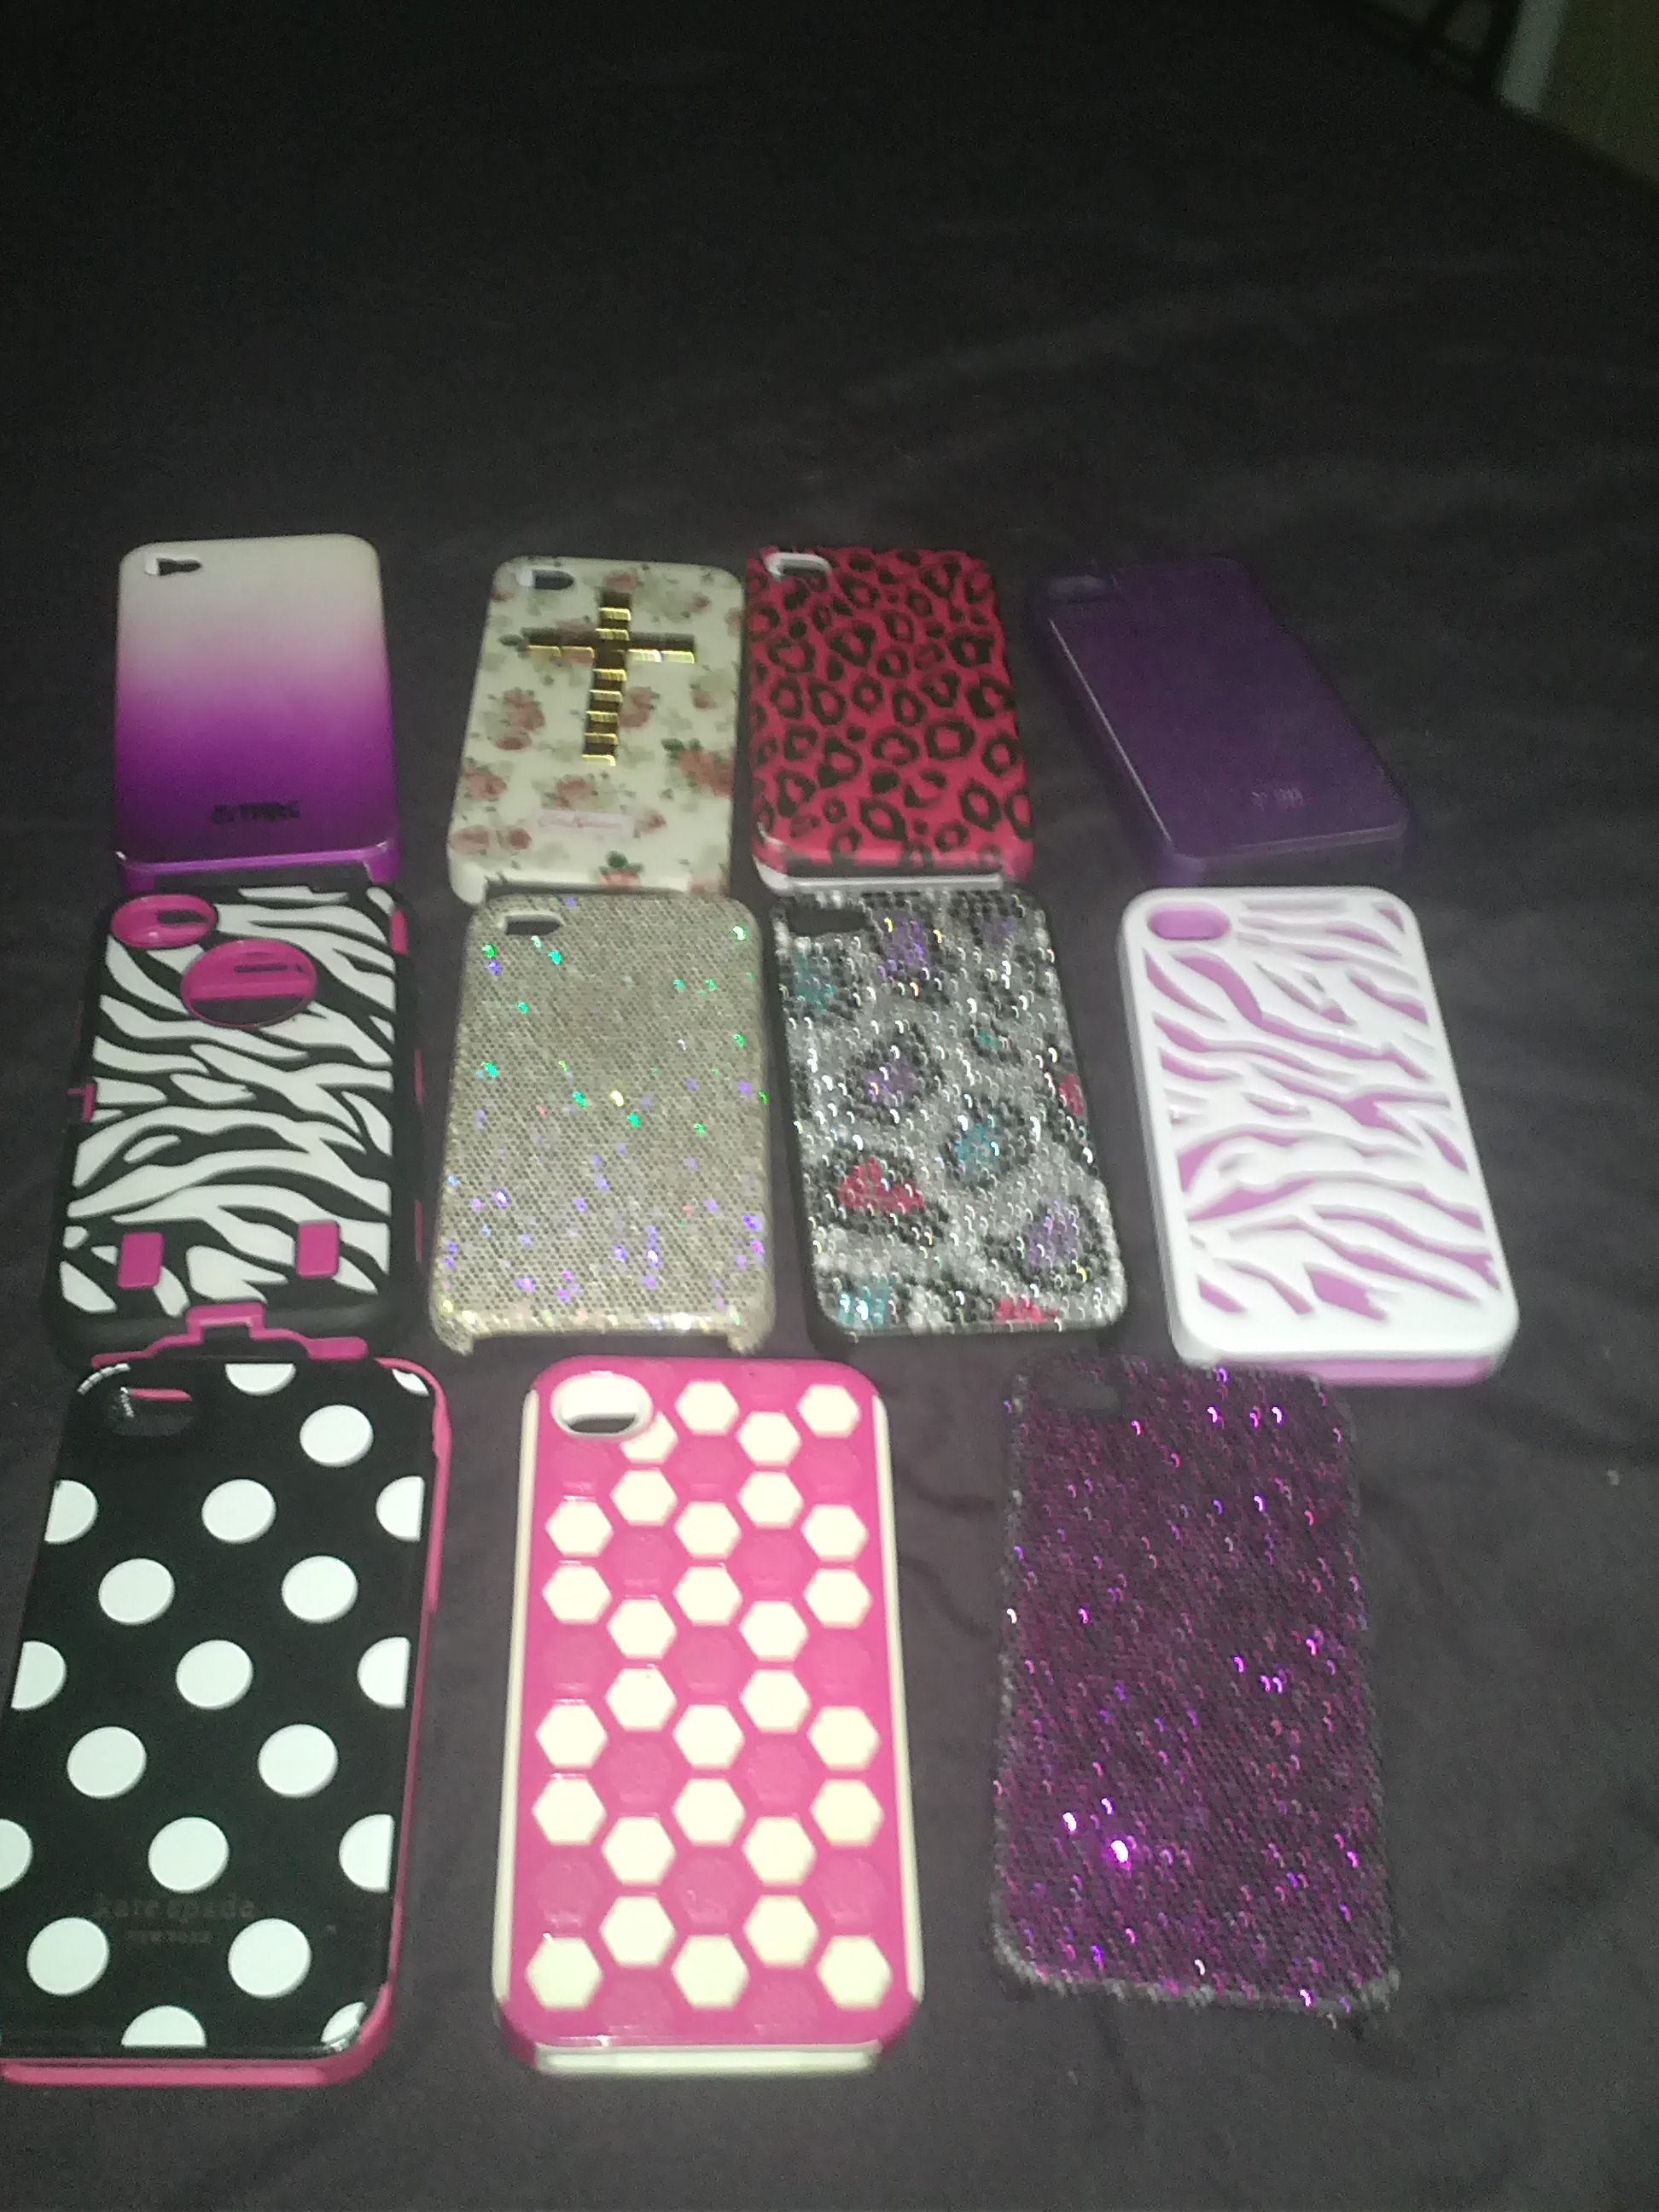 Iphone 4/4S cases (11 of them)